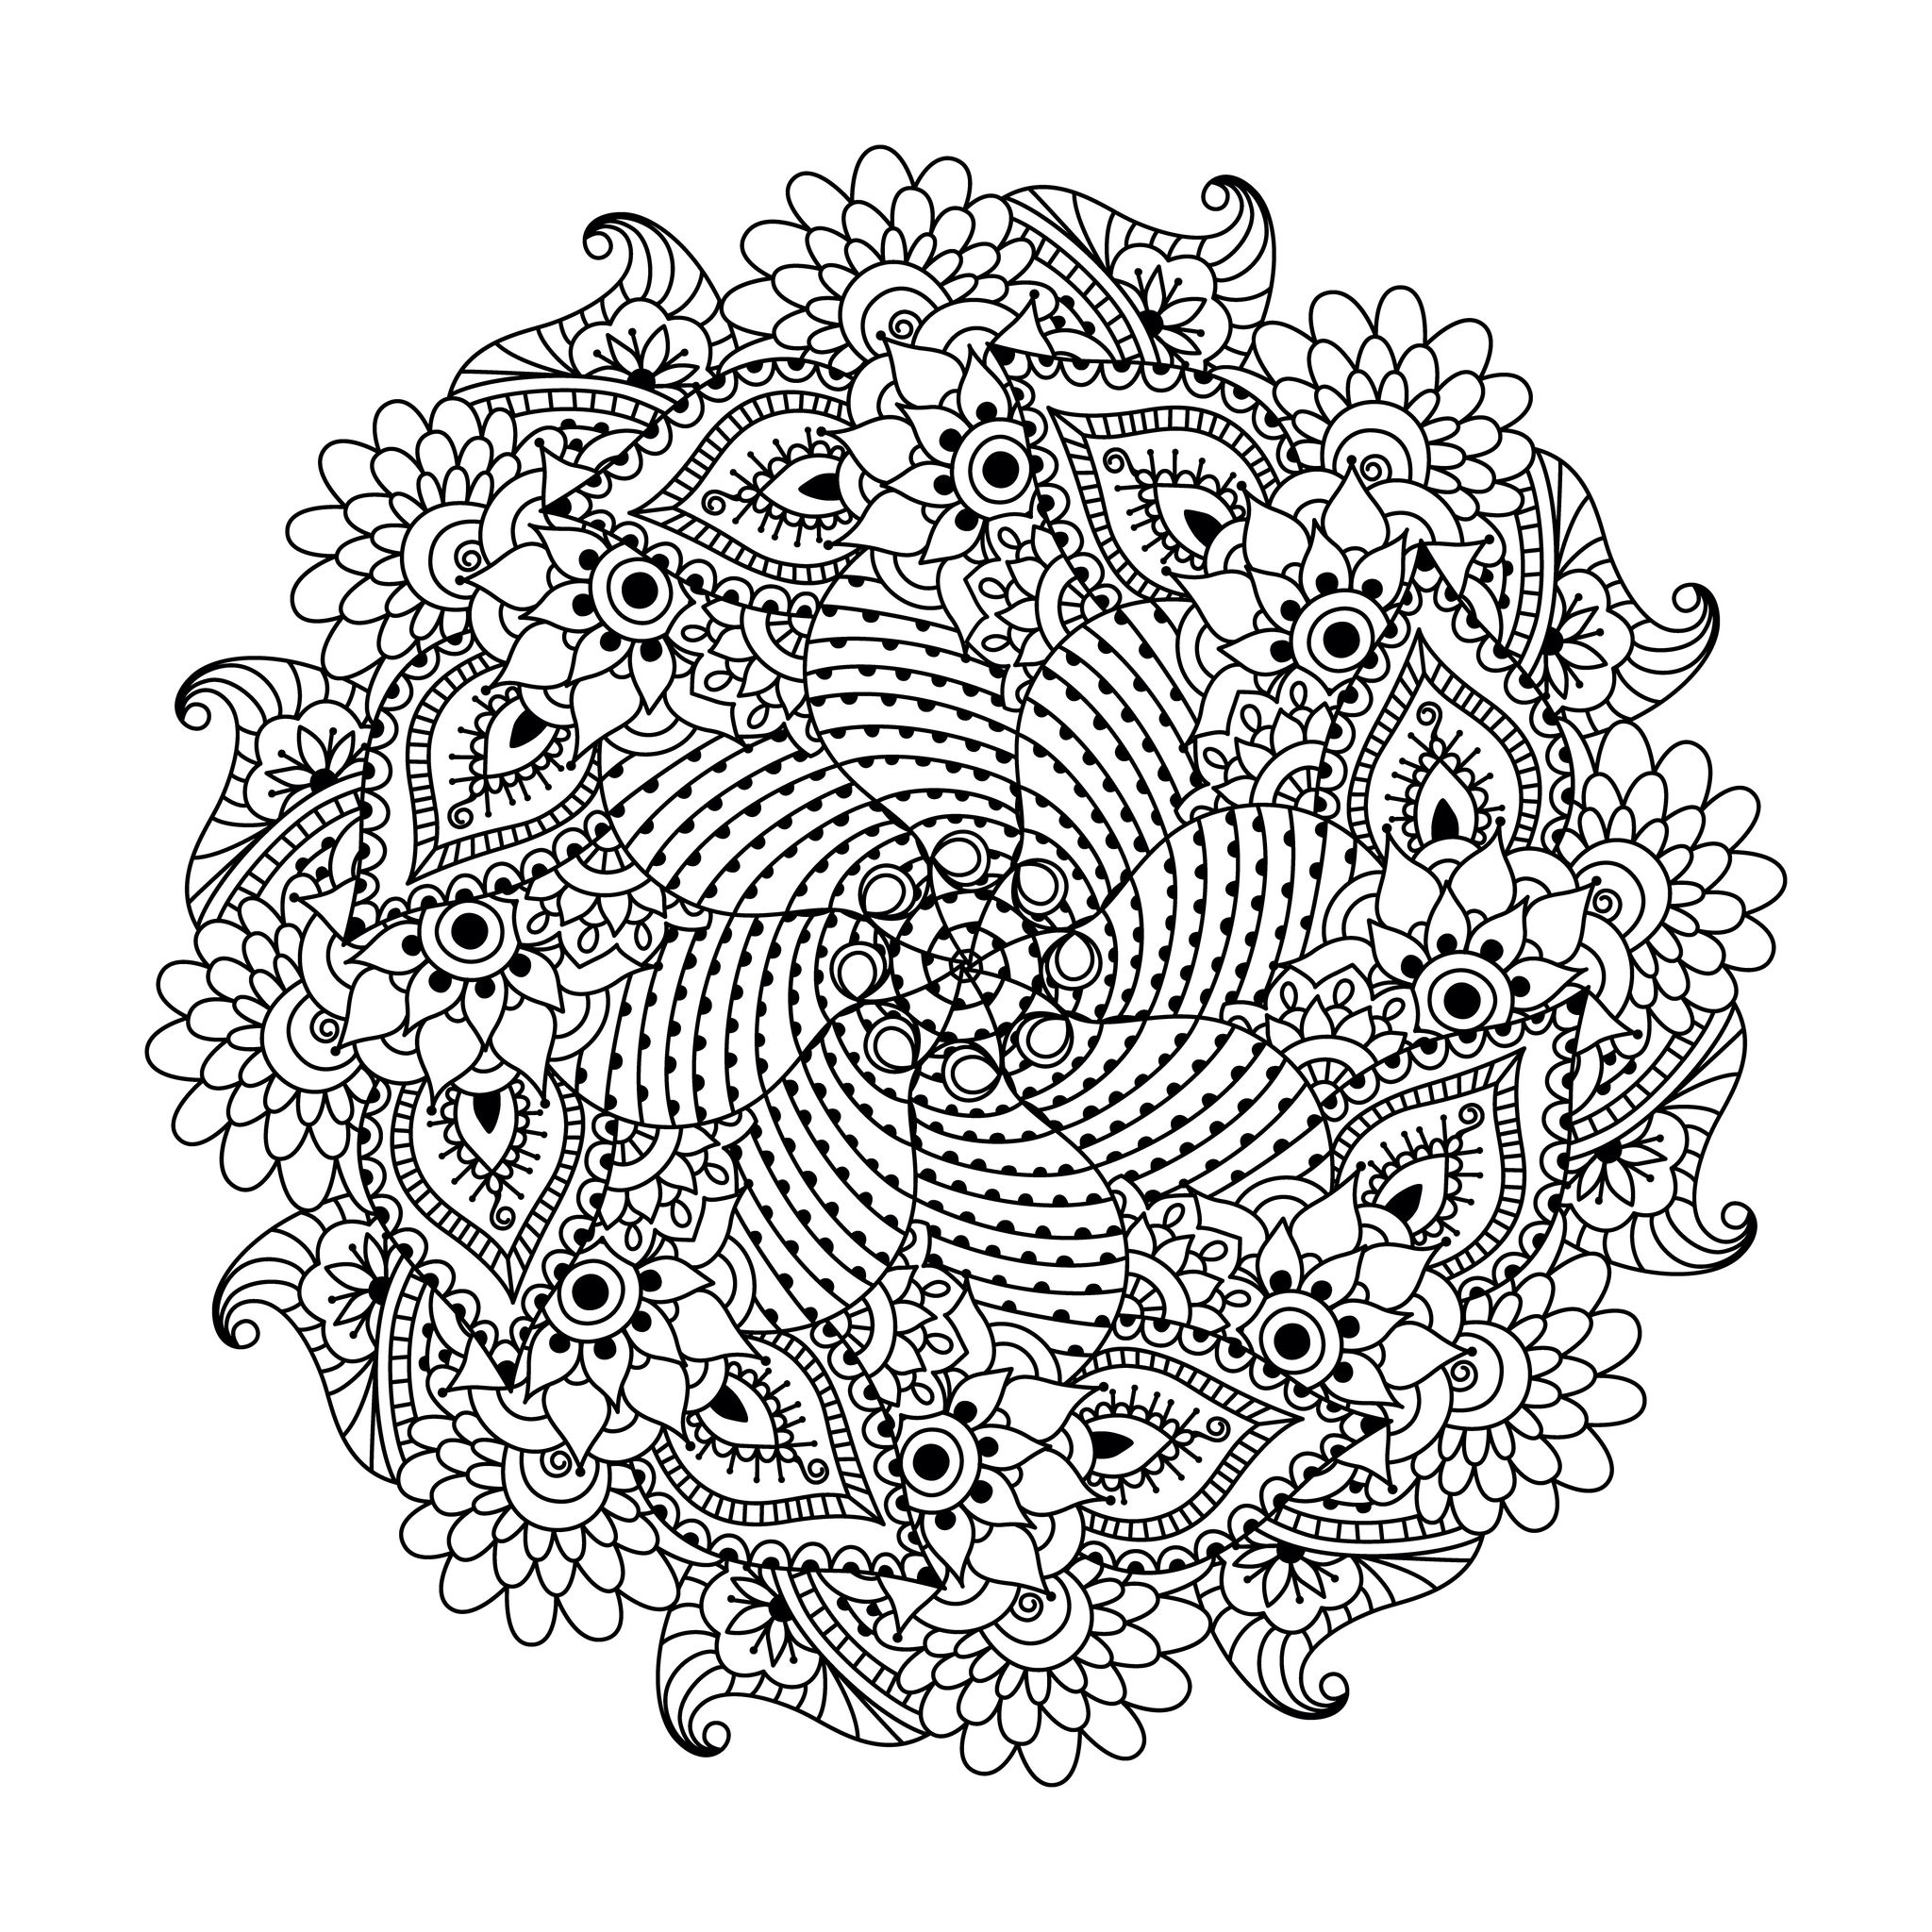 Coloring page mandala with flowers and leaves by Ceramaama